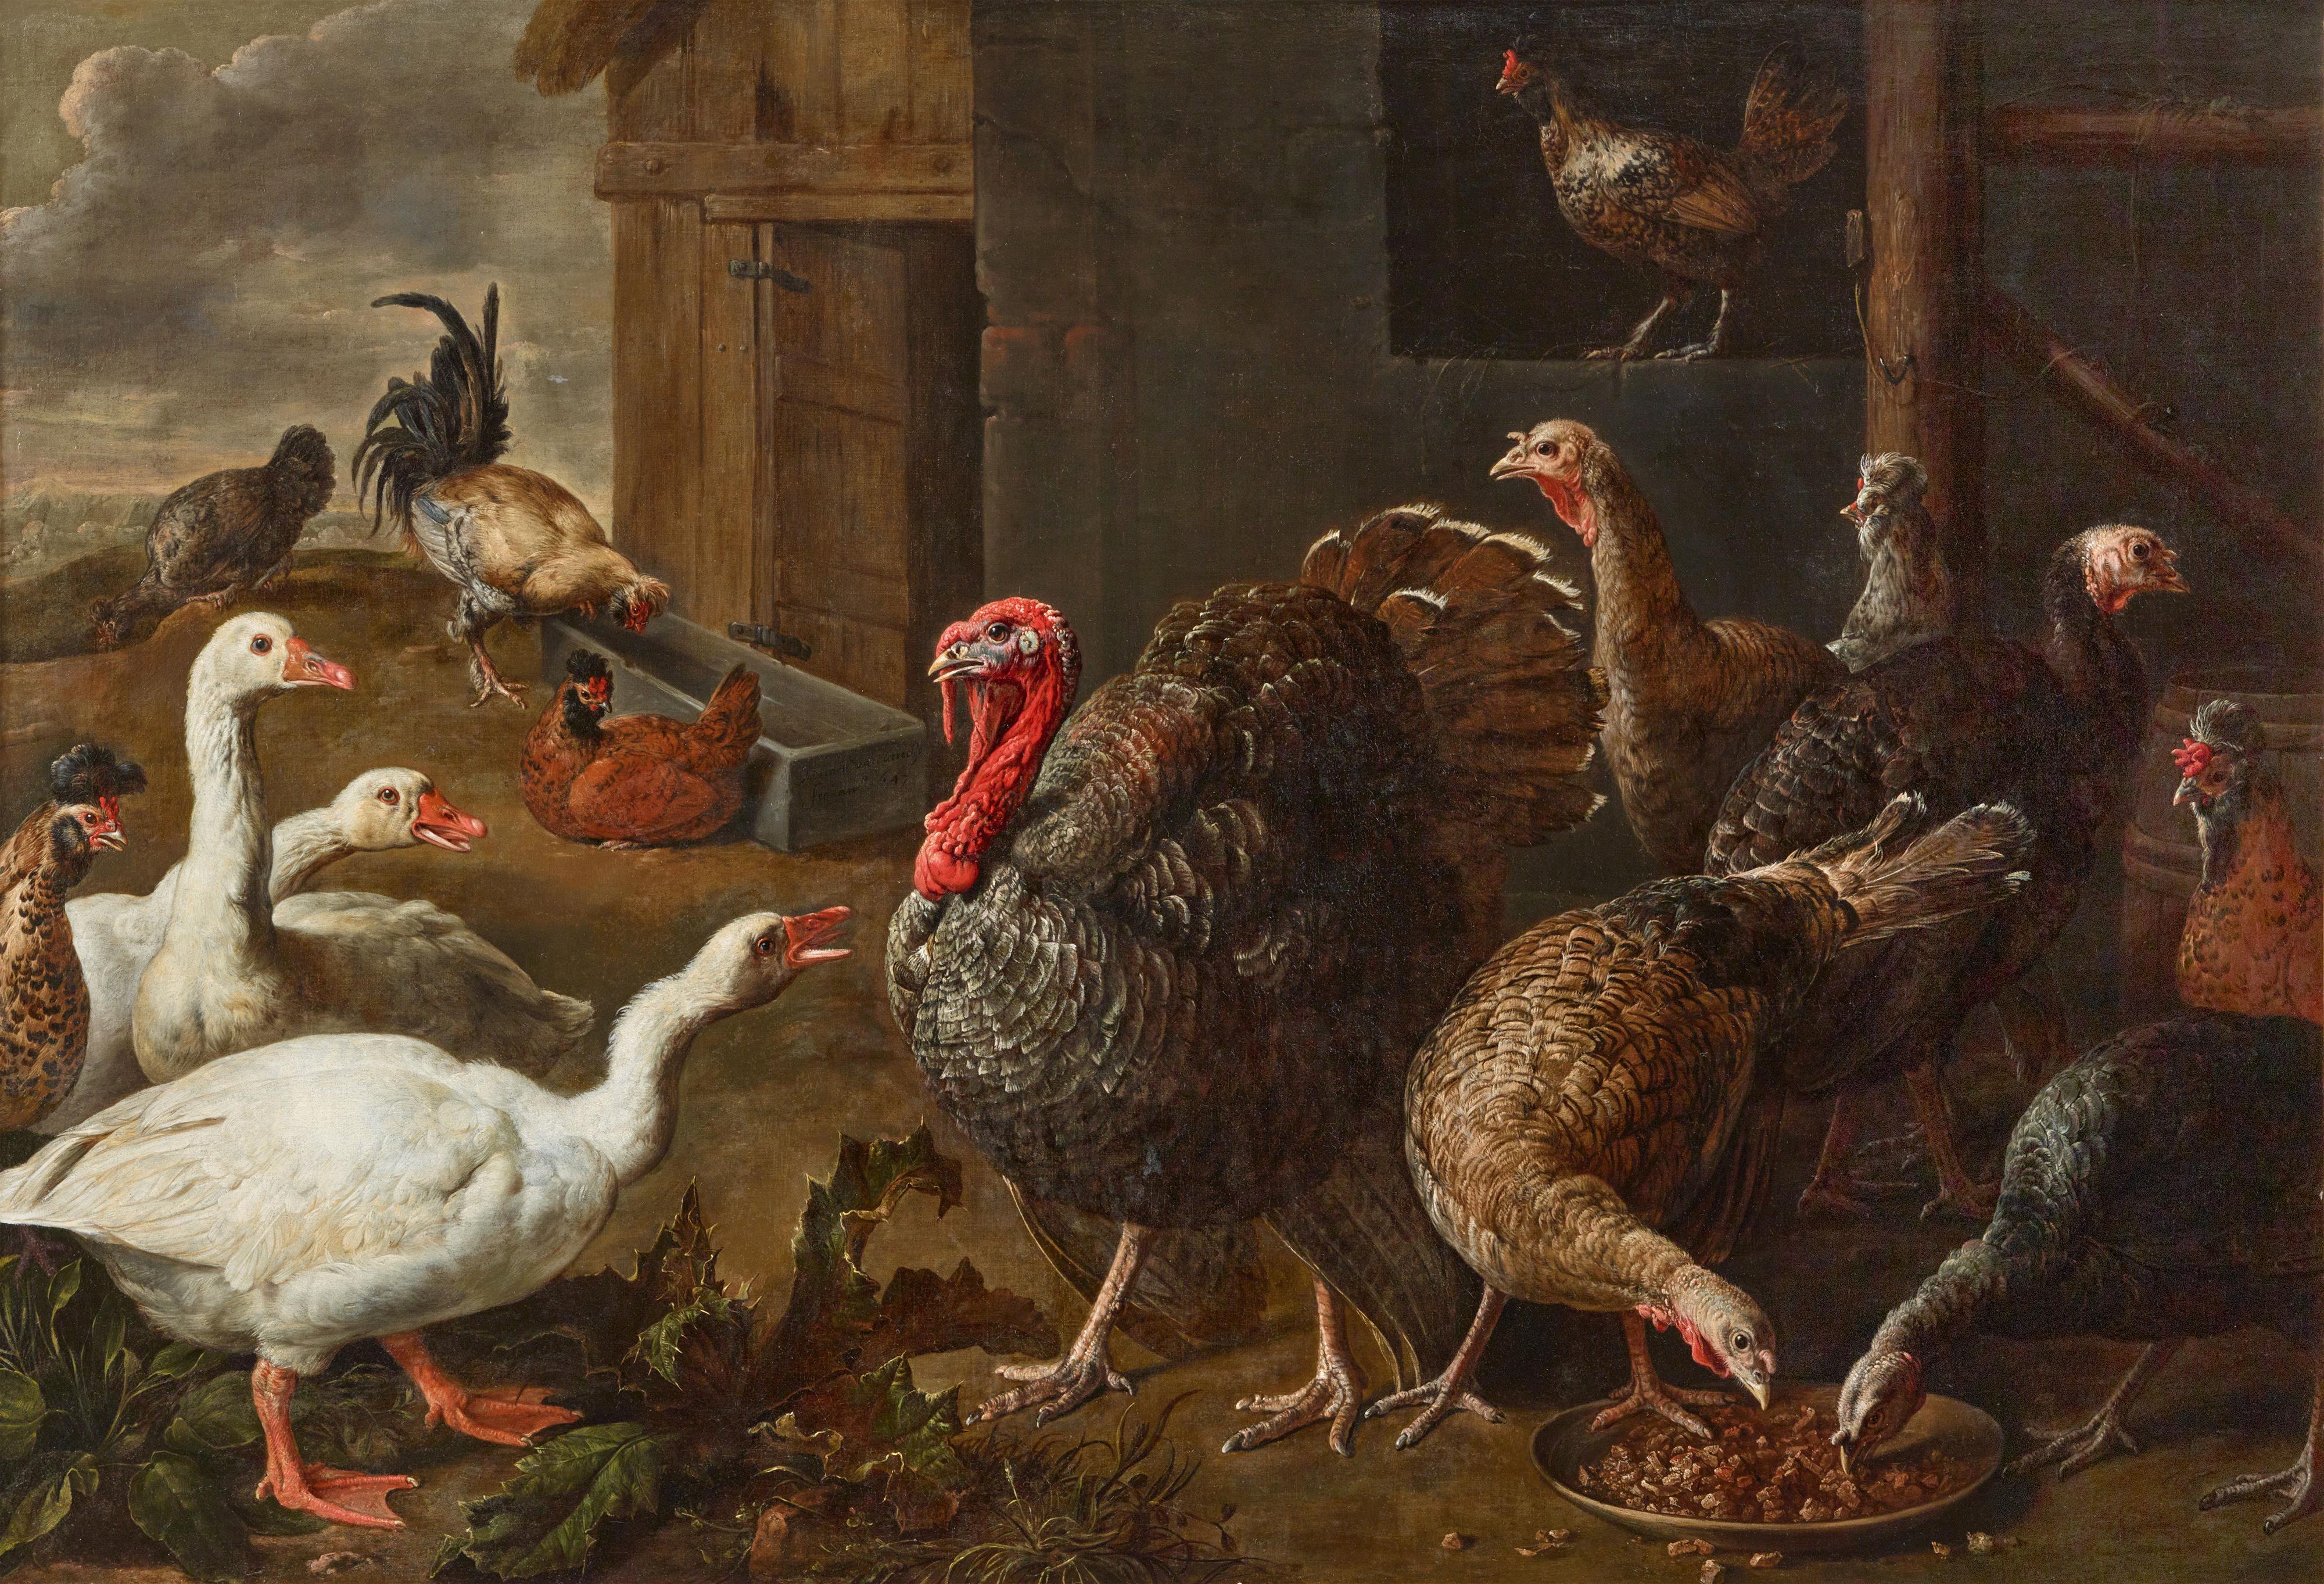 Adriaen van Utrecht - Poultry Farm with Turkeys, Geese and Hens - image-1